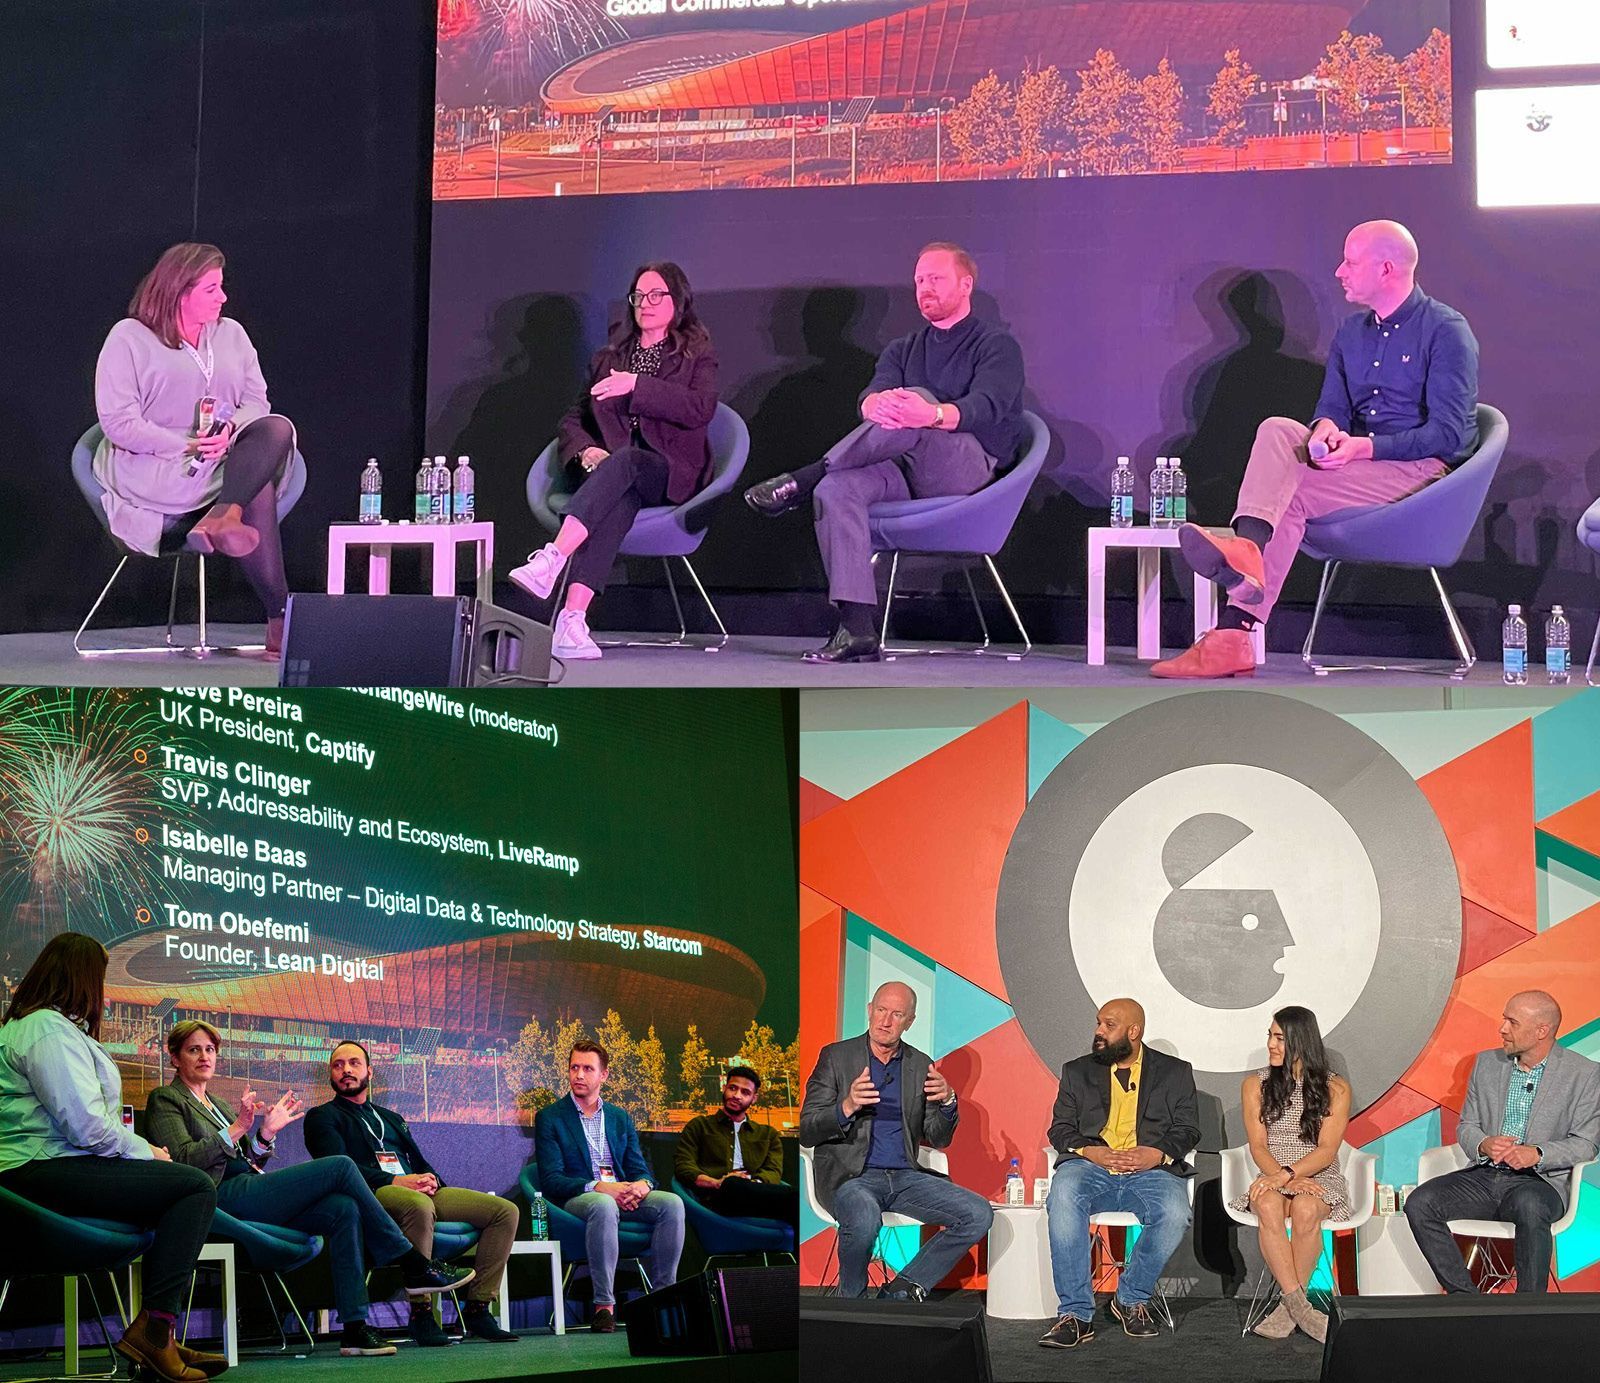 Captify Live On Stage At ATS London and Advertising Week New York